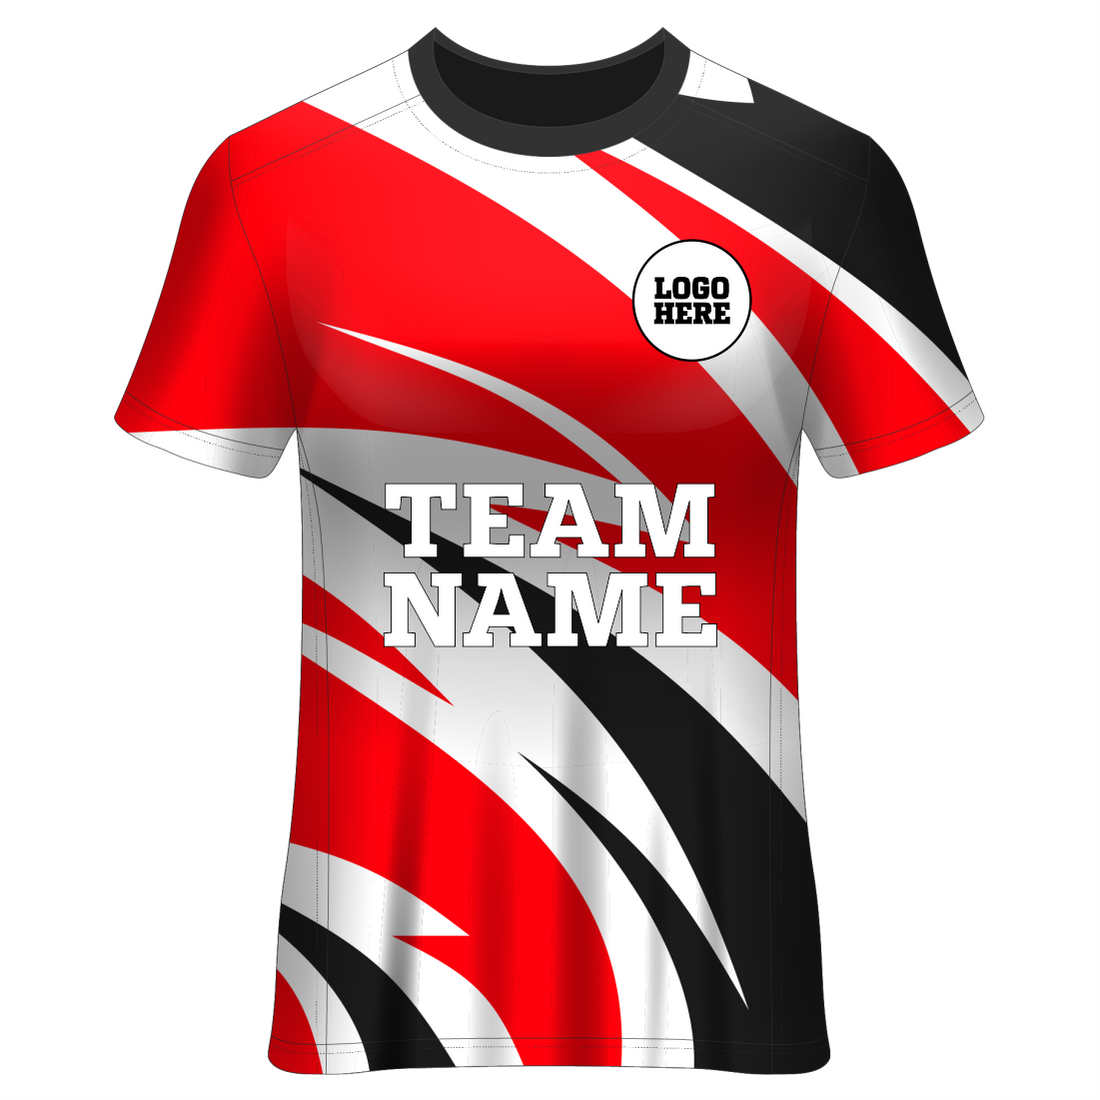 NEXT PRINT All Over Printed Customized Sublimation T-Shirt Unisex Sports Jersey Player Name & Number, Team Name And Logo. 2080352218